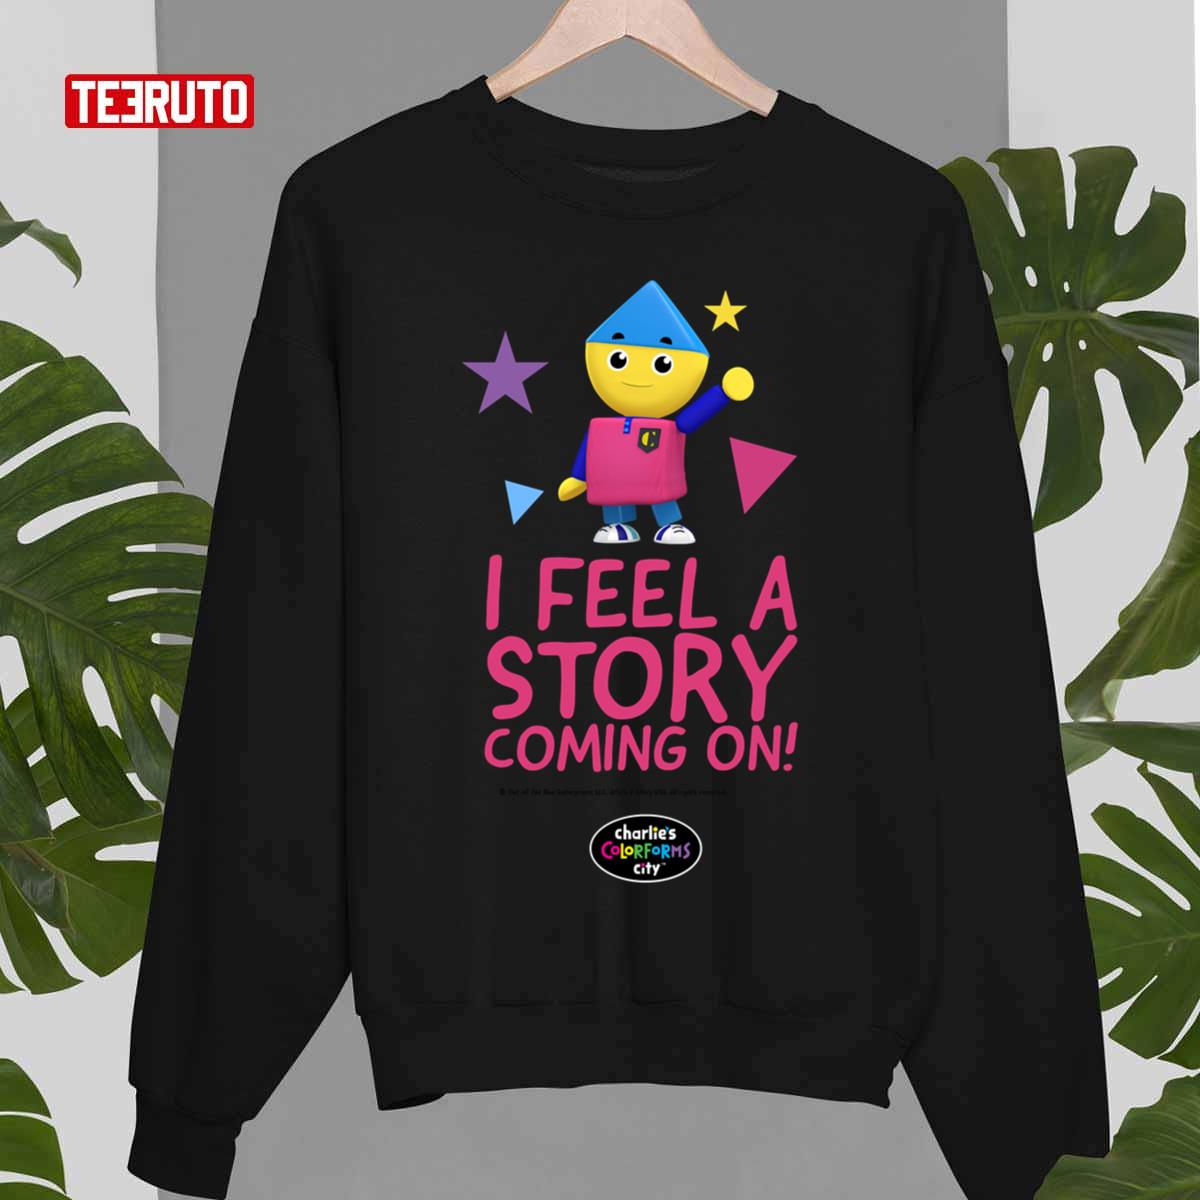 Charlie's Colorforms City I Feel Story Coming On Unisex T-Shirt